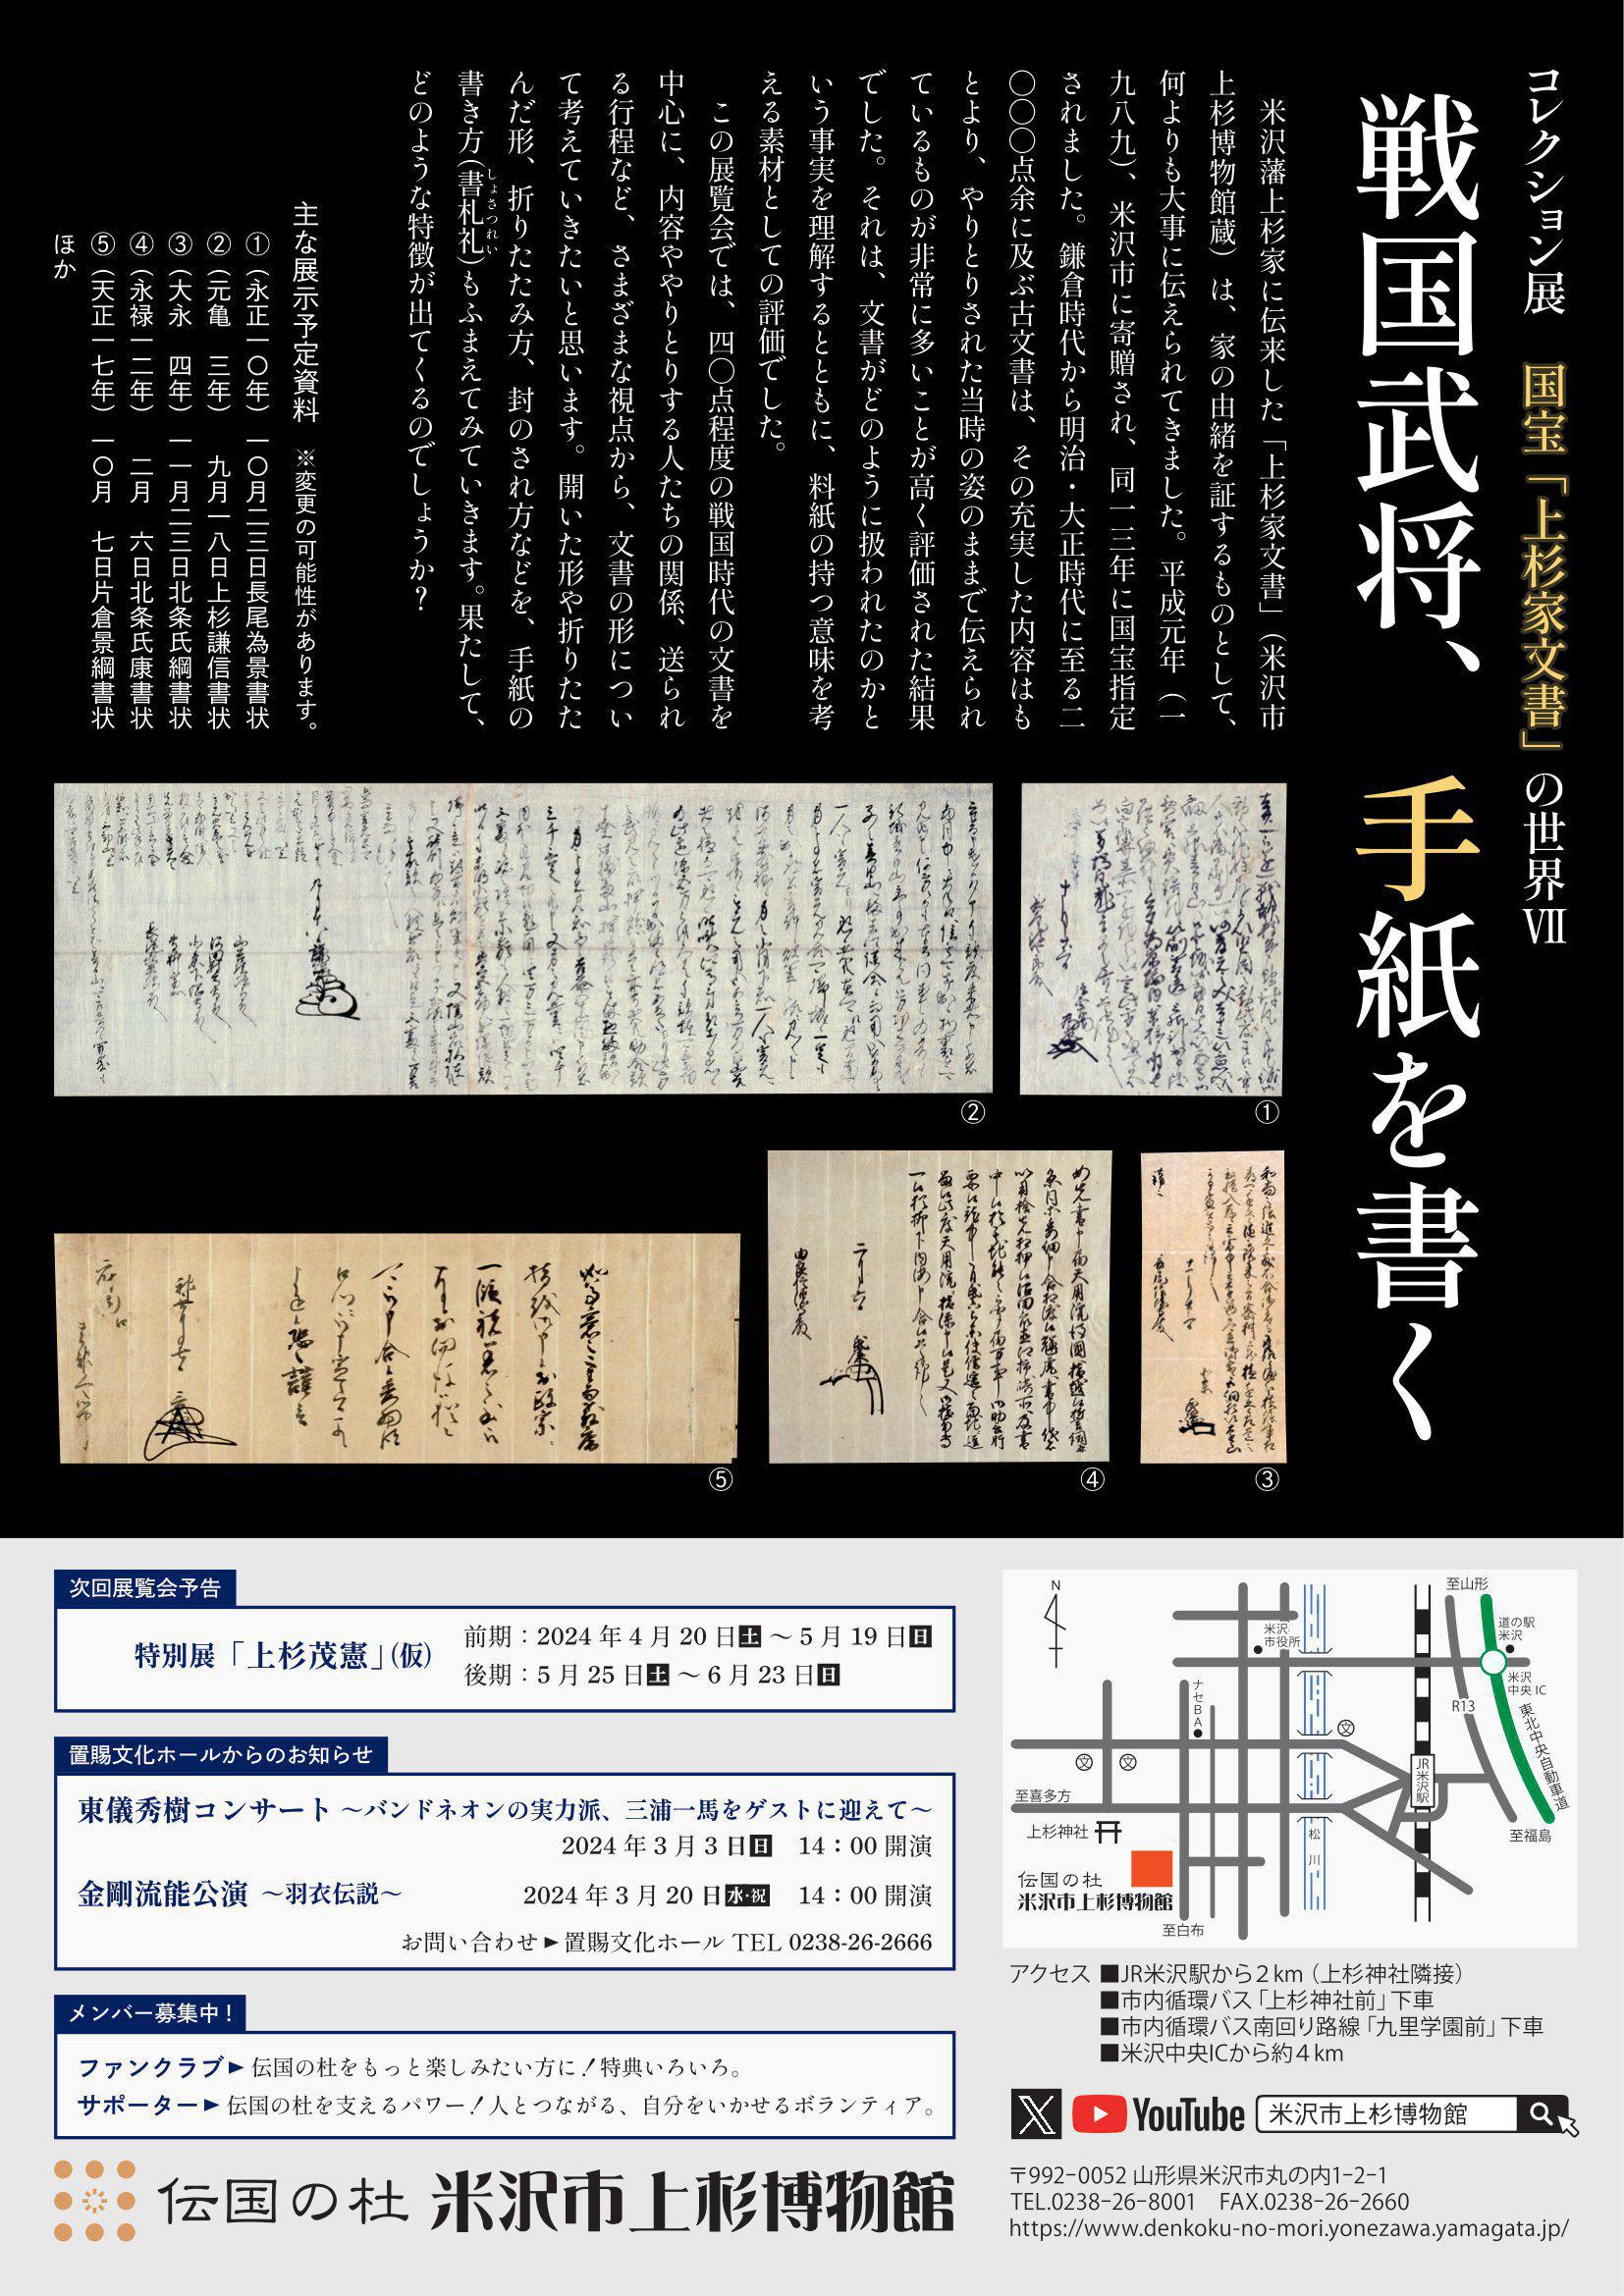 Yonezawa City Uesugi Museum Collection Exhibit - The World of the Uesugi Clan Archives VII ~ The Sengoku Warlord Writes